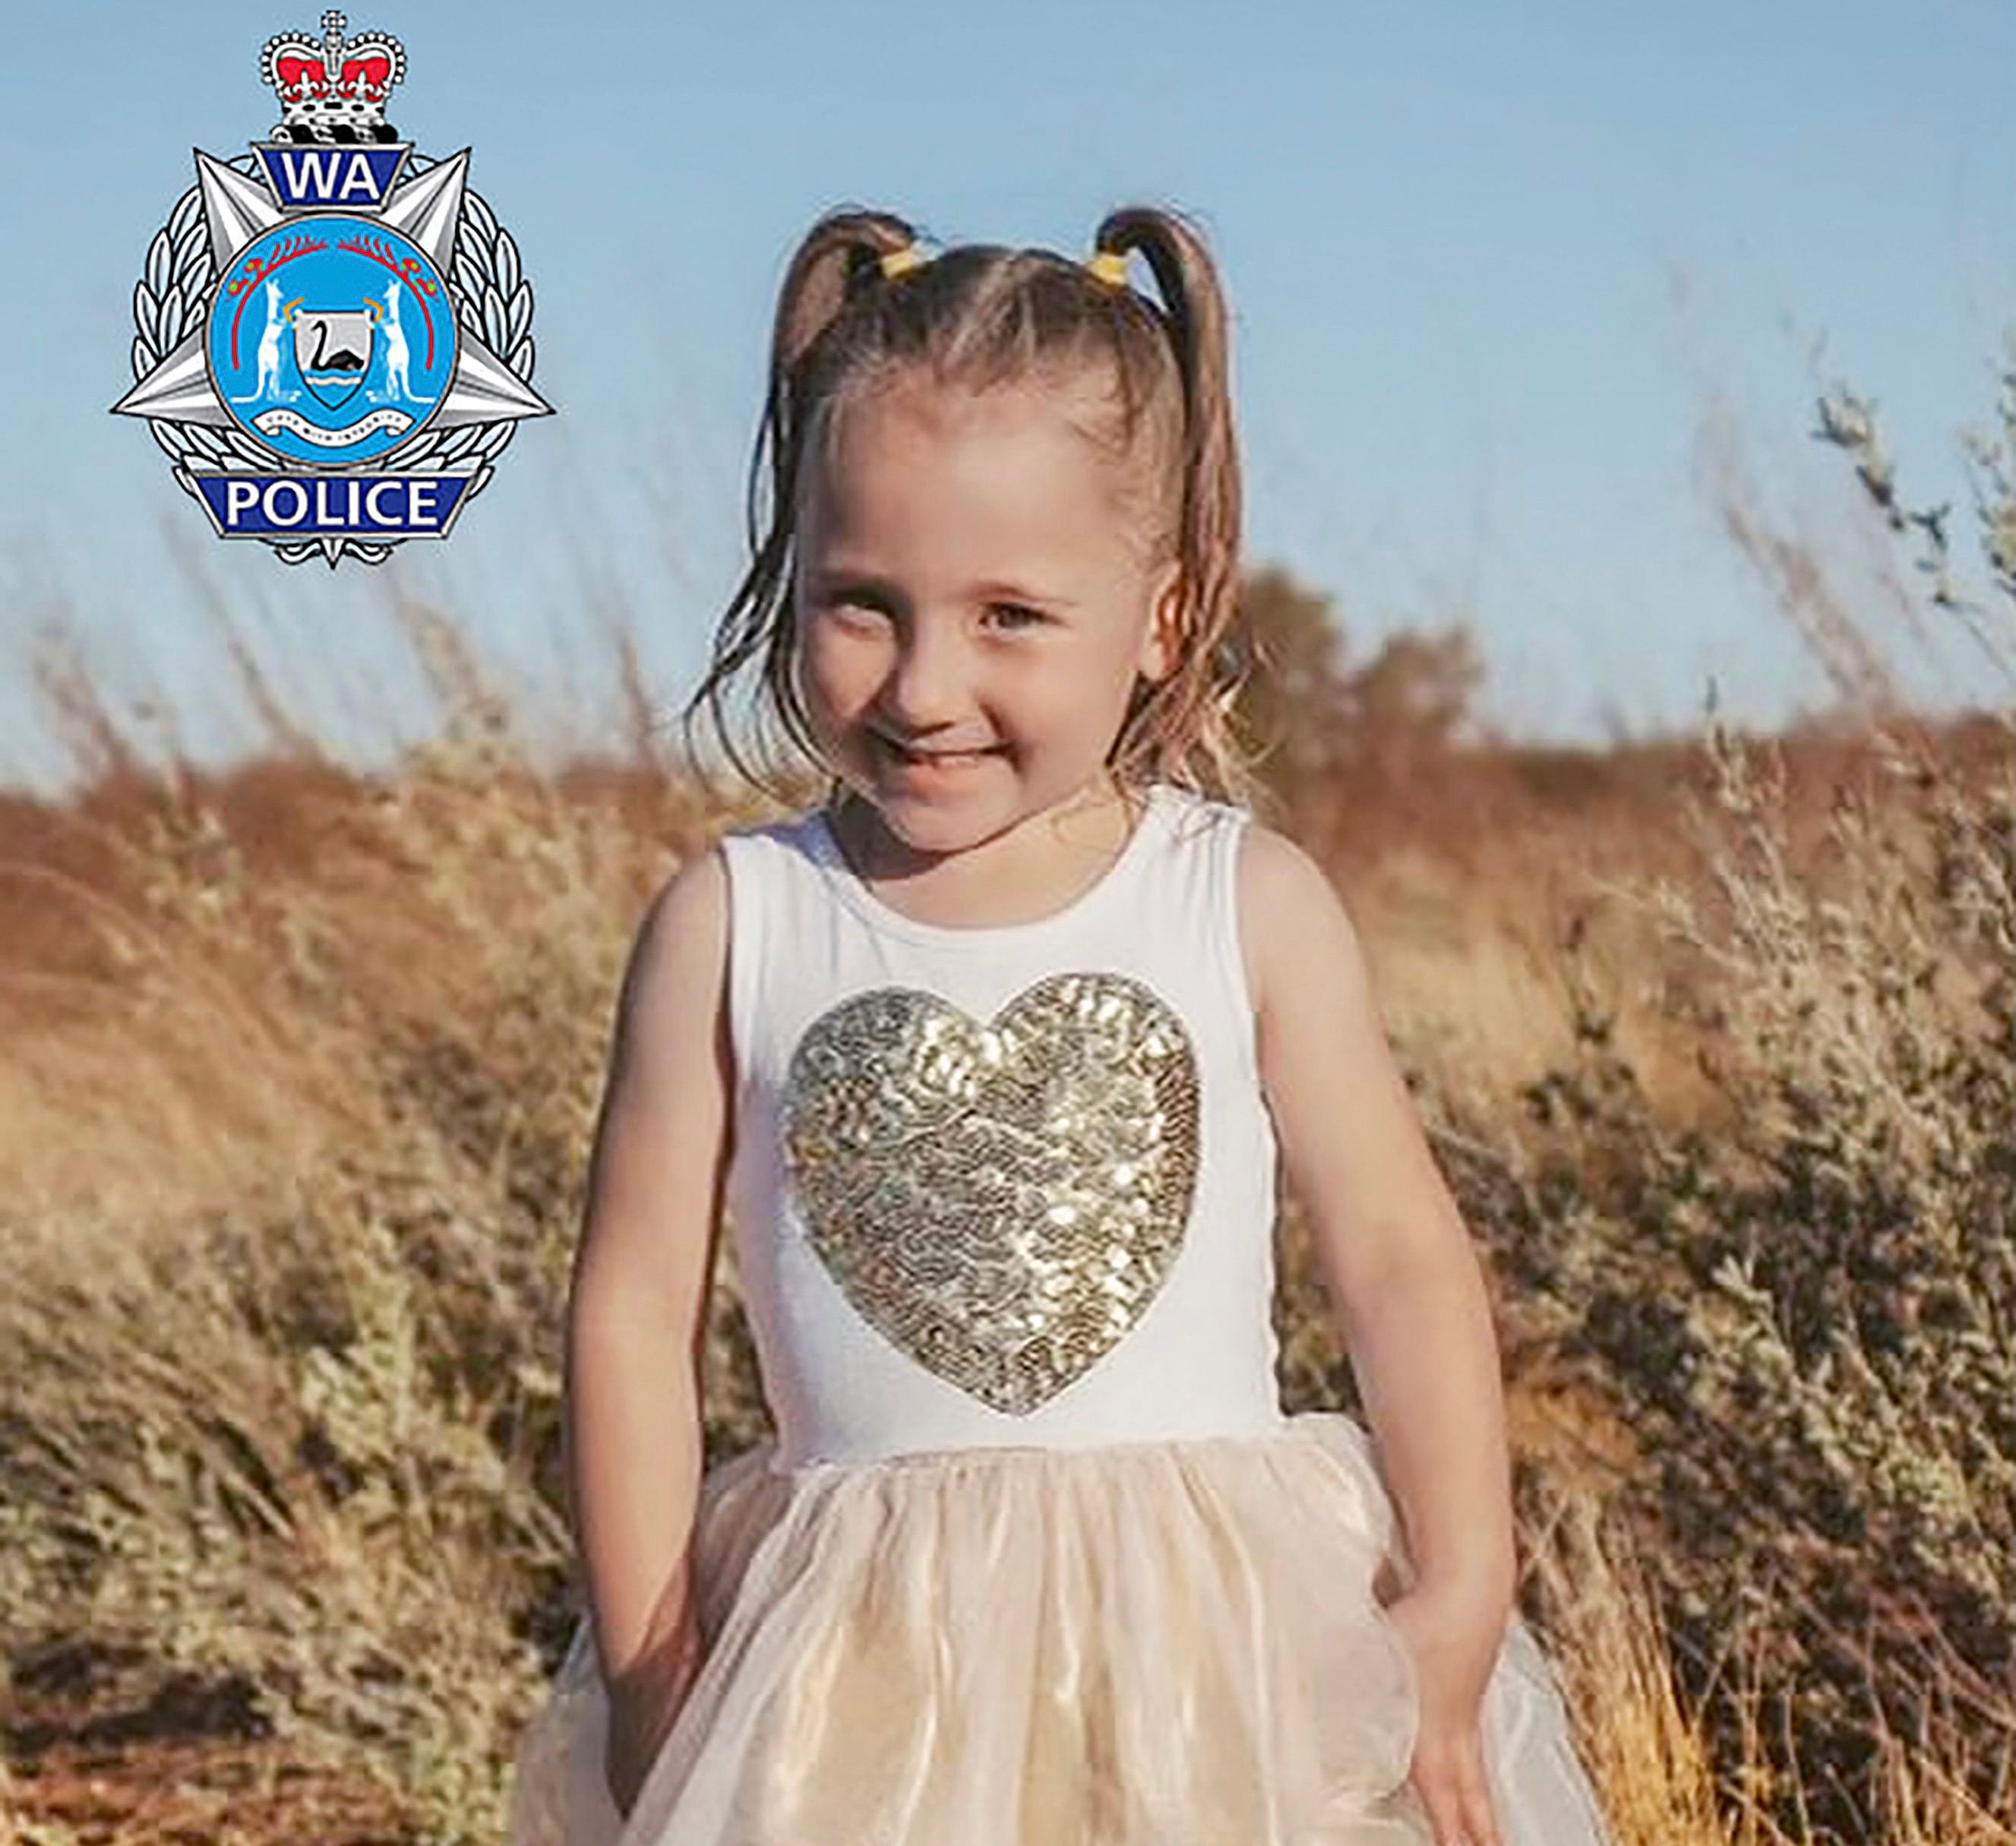 Four-year-old Cleo Smith disappeared from her family’s tent in Western Australia during the early hours of 16 October